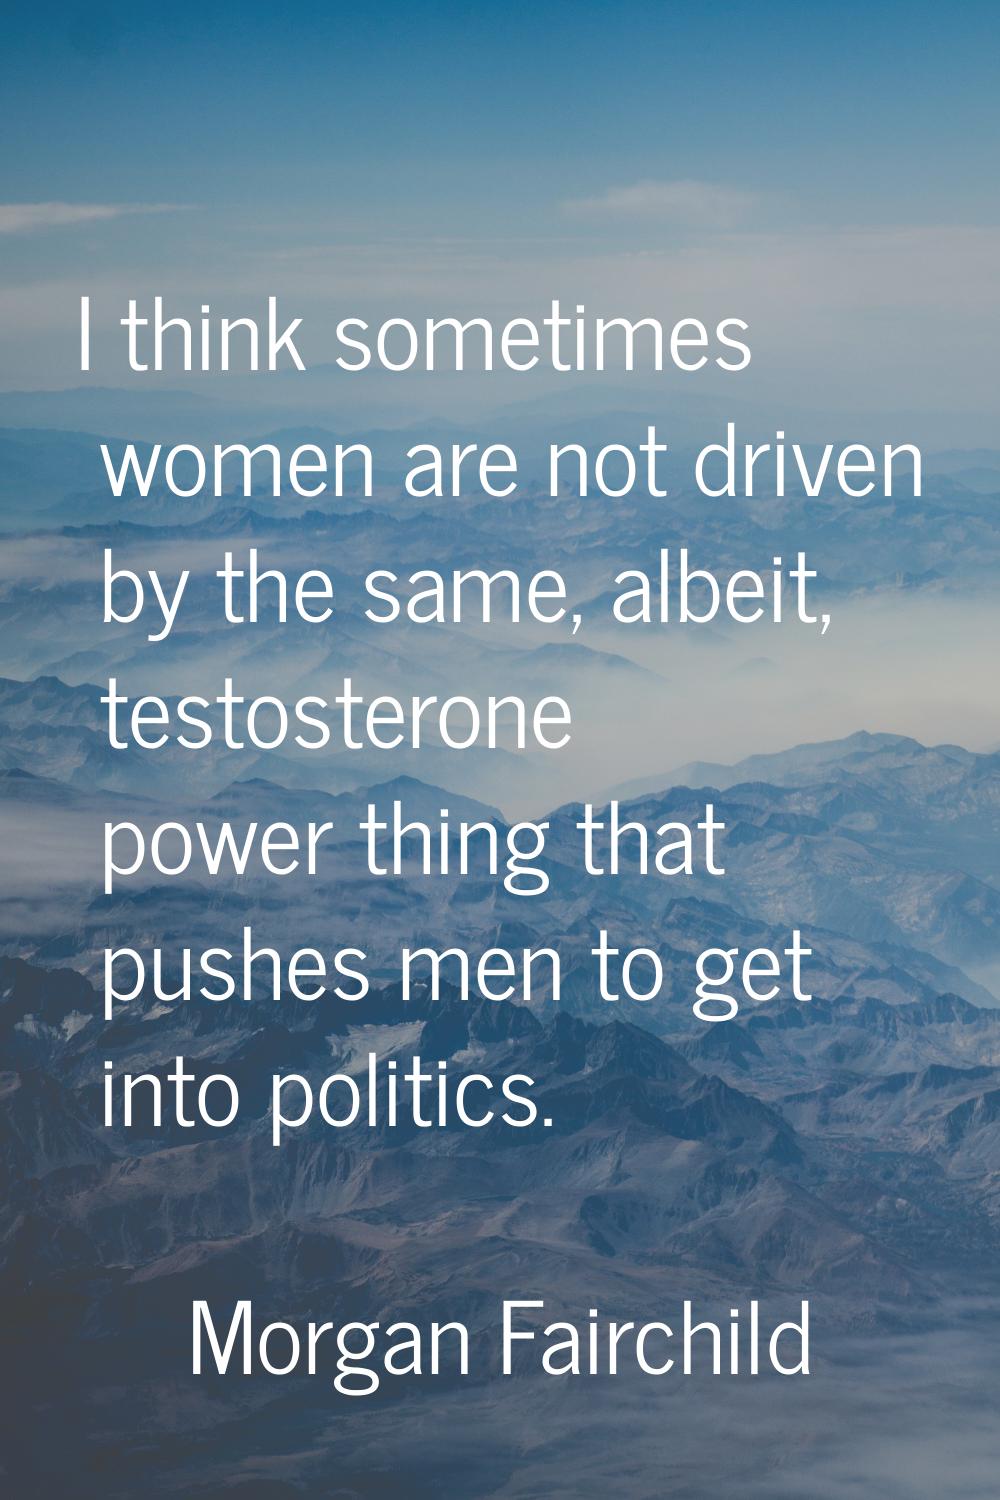 I think sometimes women are not driven by the same, albeit, testosterone power thing that pushes me